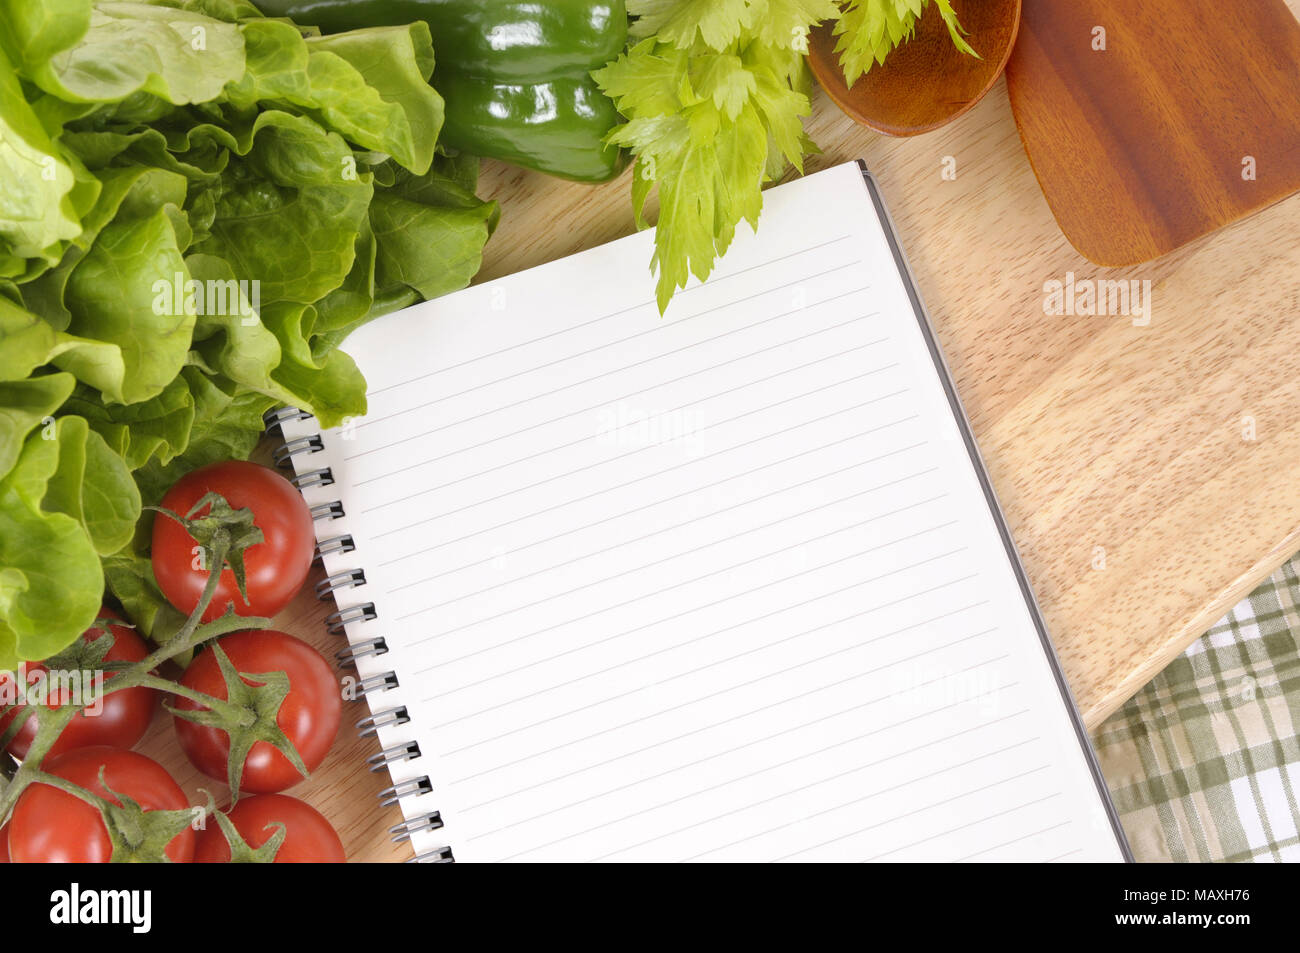 https://c8.alamy.com/comp/MAXH76/selection-of-salad-vegetables-with-blank-recipe-book-or-shopping-list-on-a-green-check-tablecloth-with-wood-chopping-board-MAXH76.jpg